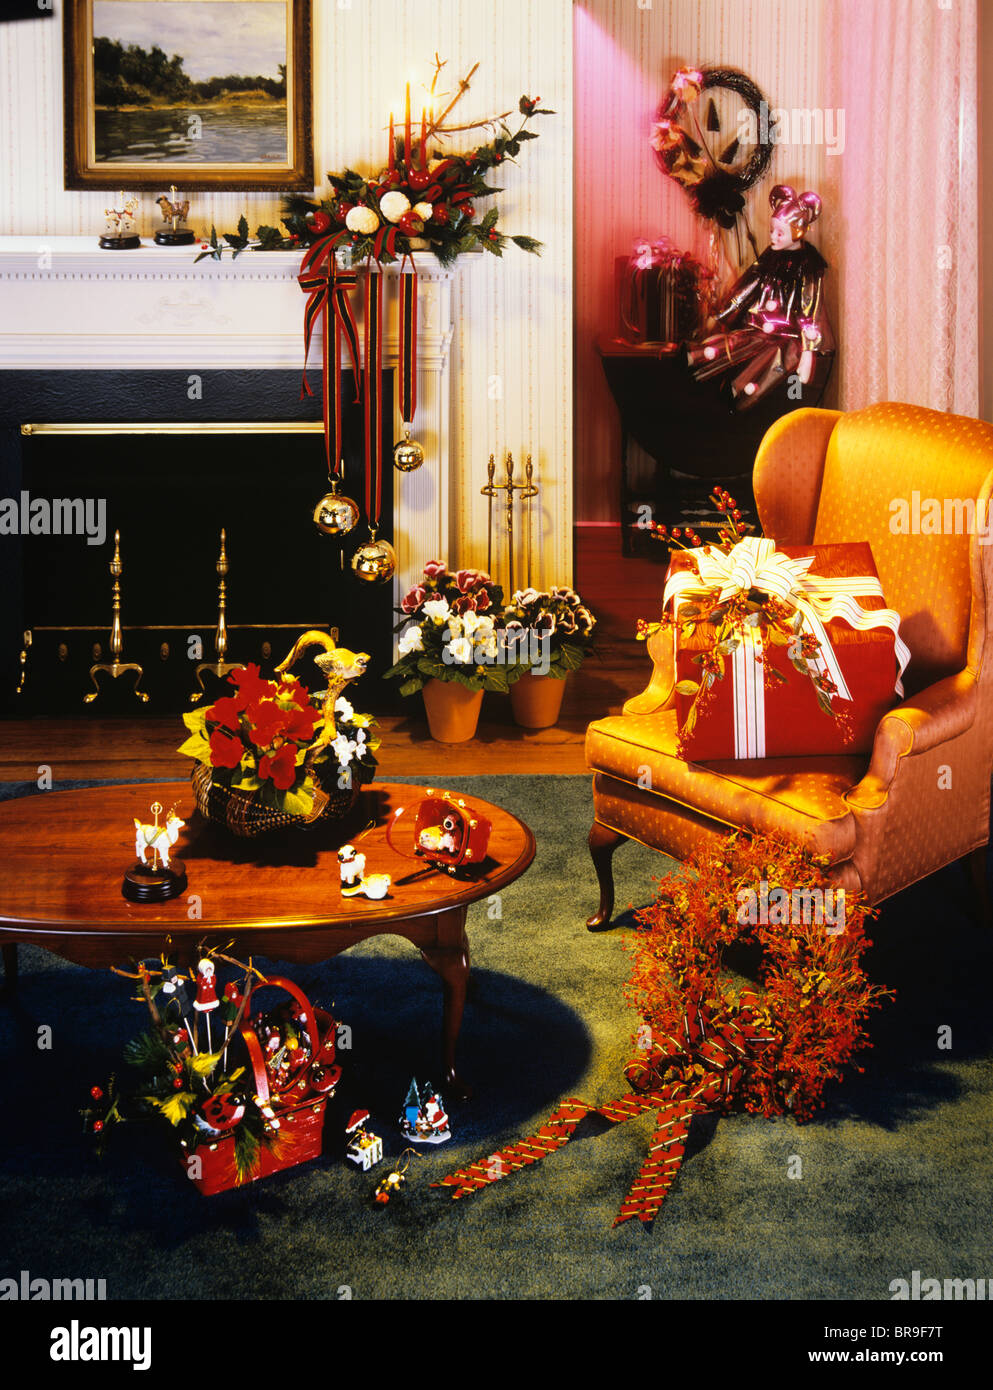 1970s LIVING ROOM INTERIOR DECORATED FOR CHRISTMAS Stock Photo